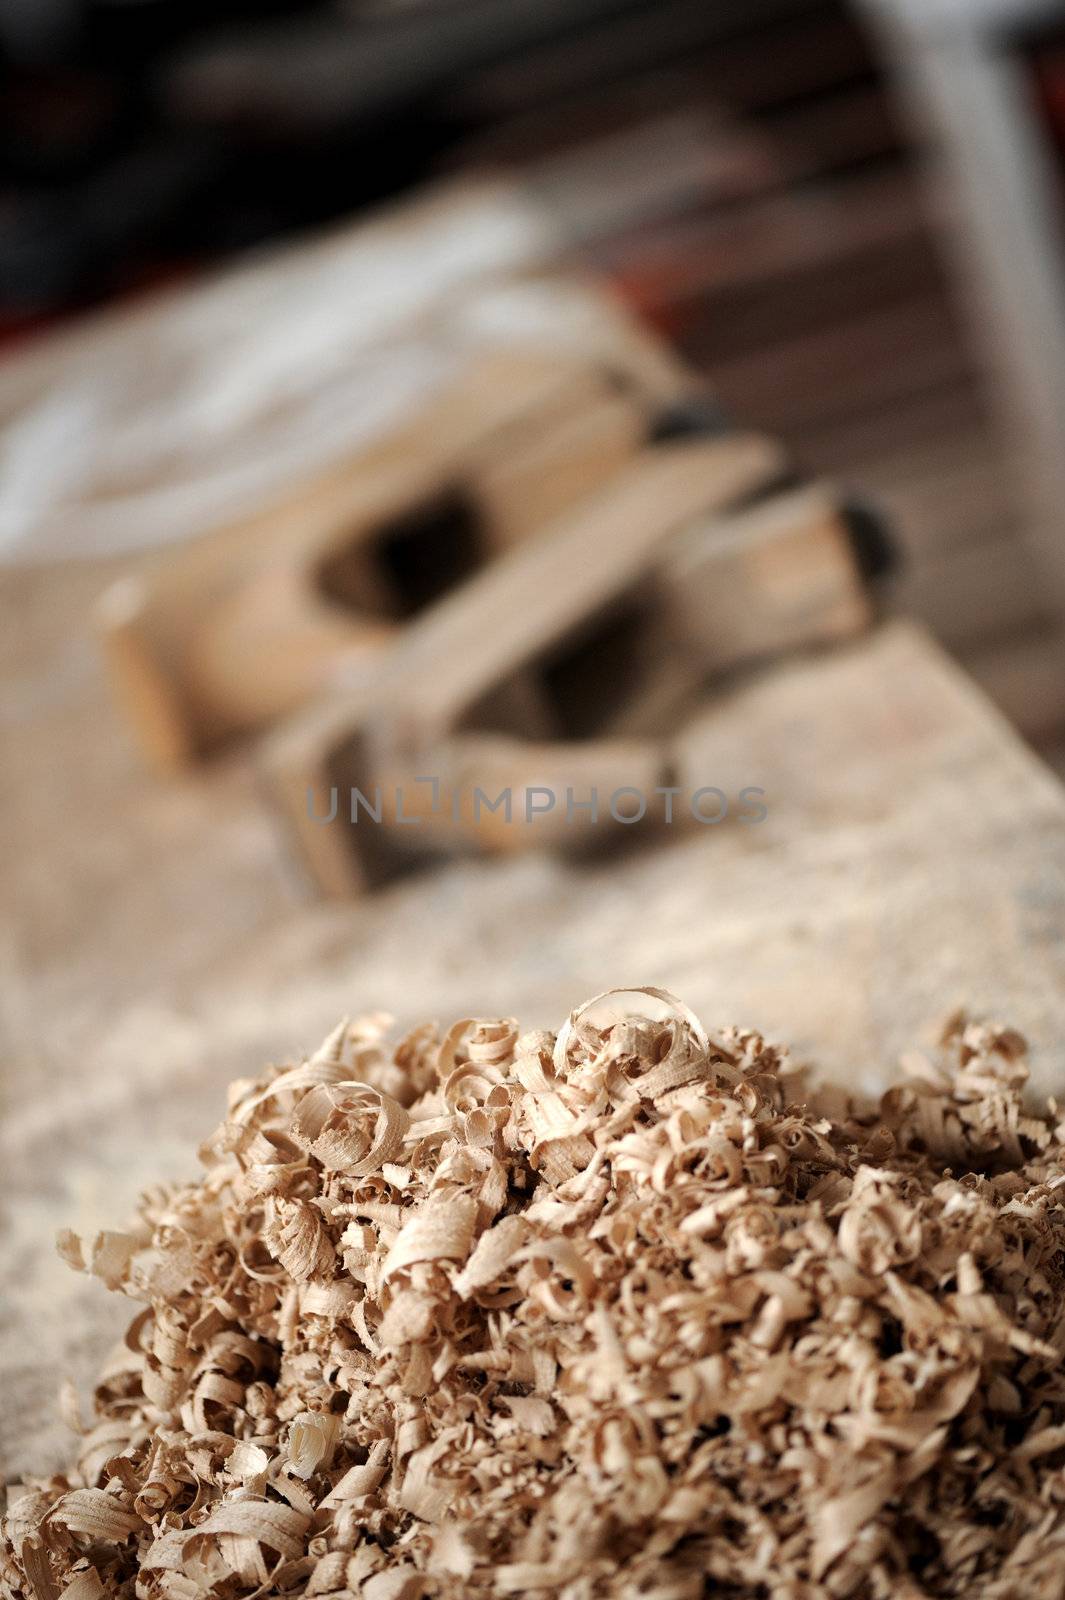 a work table of a carpenter with two hand planers and a pile of wood chips